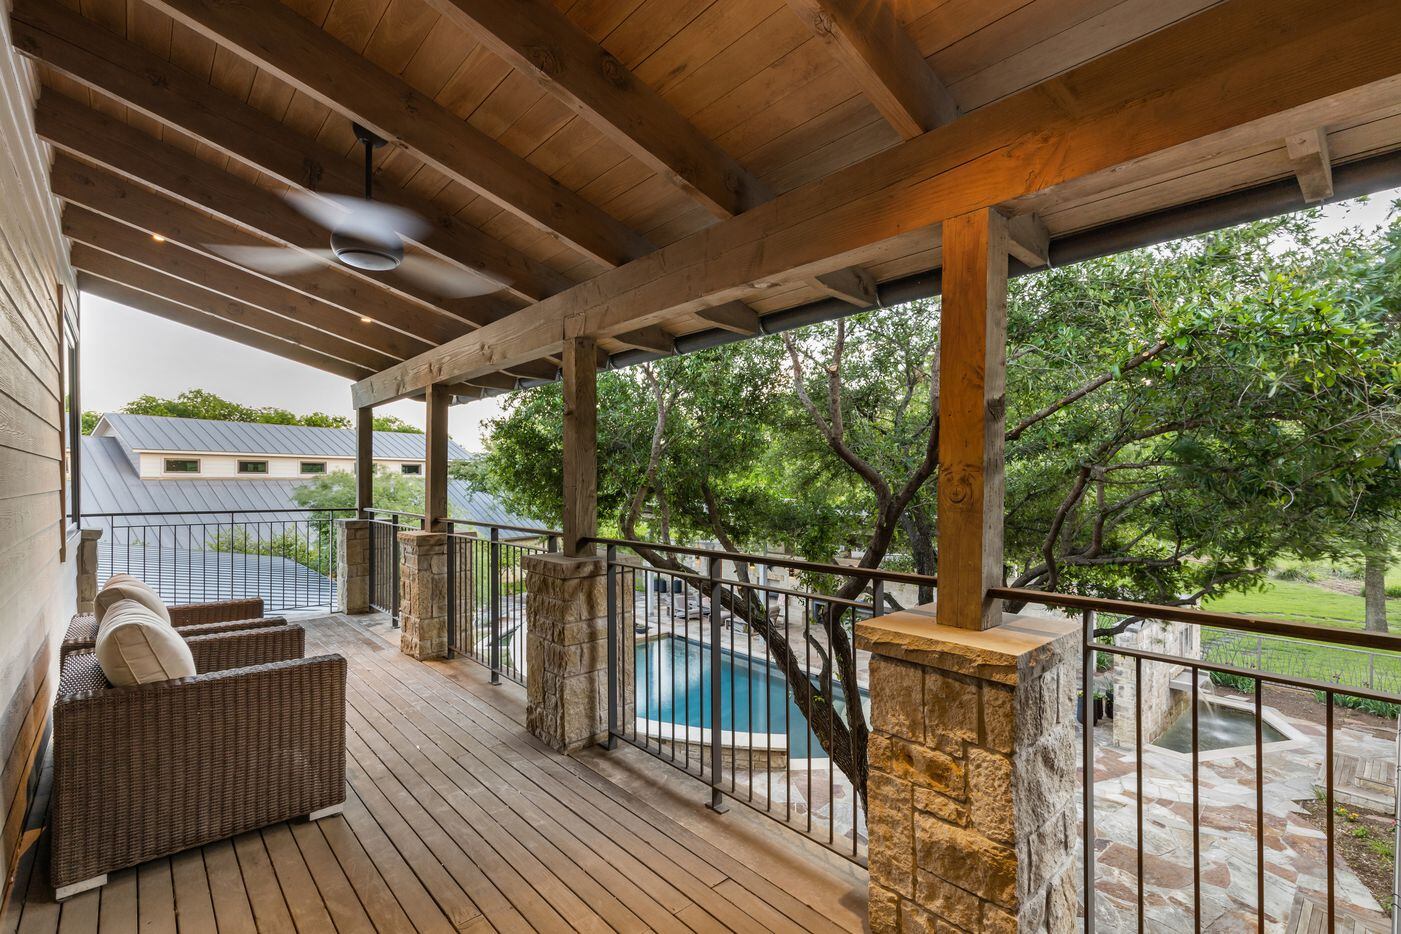 Take a look at the home at 15400 Lookout Point Circle in Frisco.